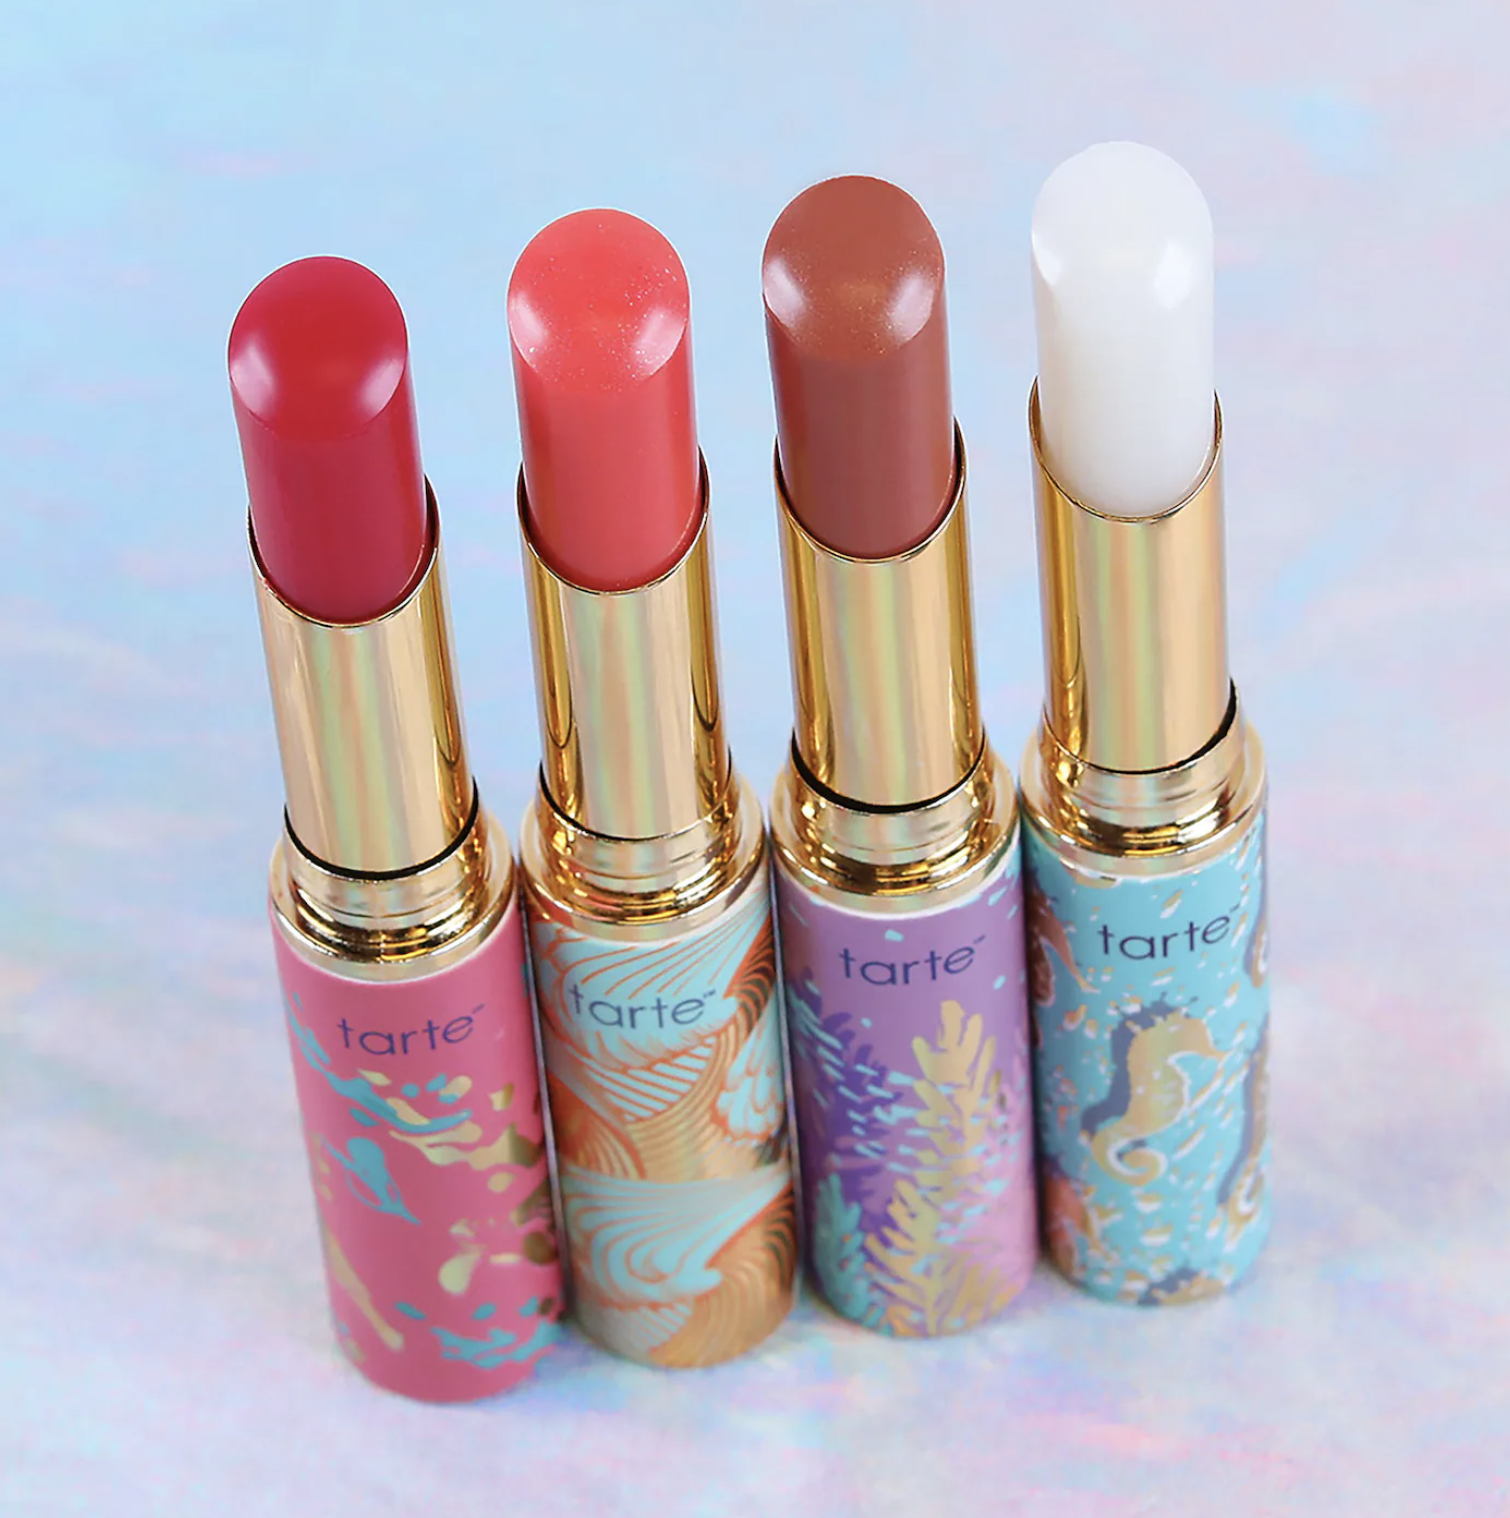 Four lip balms lined up